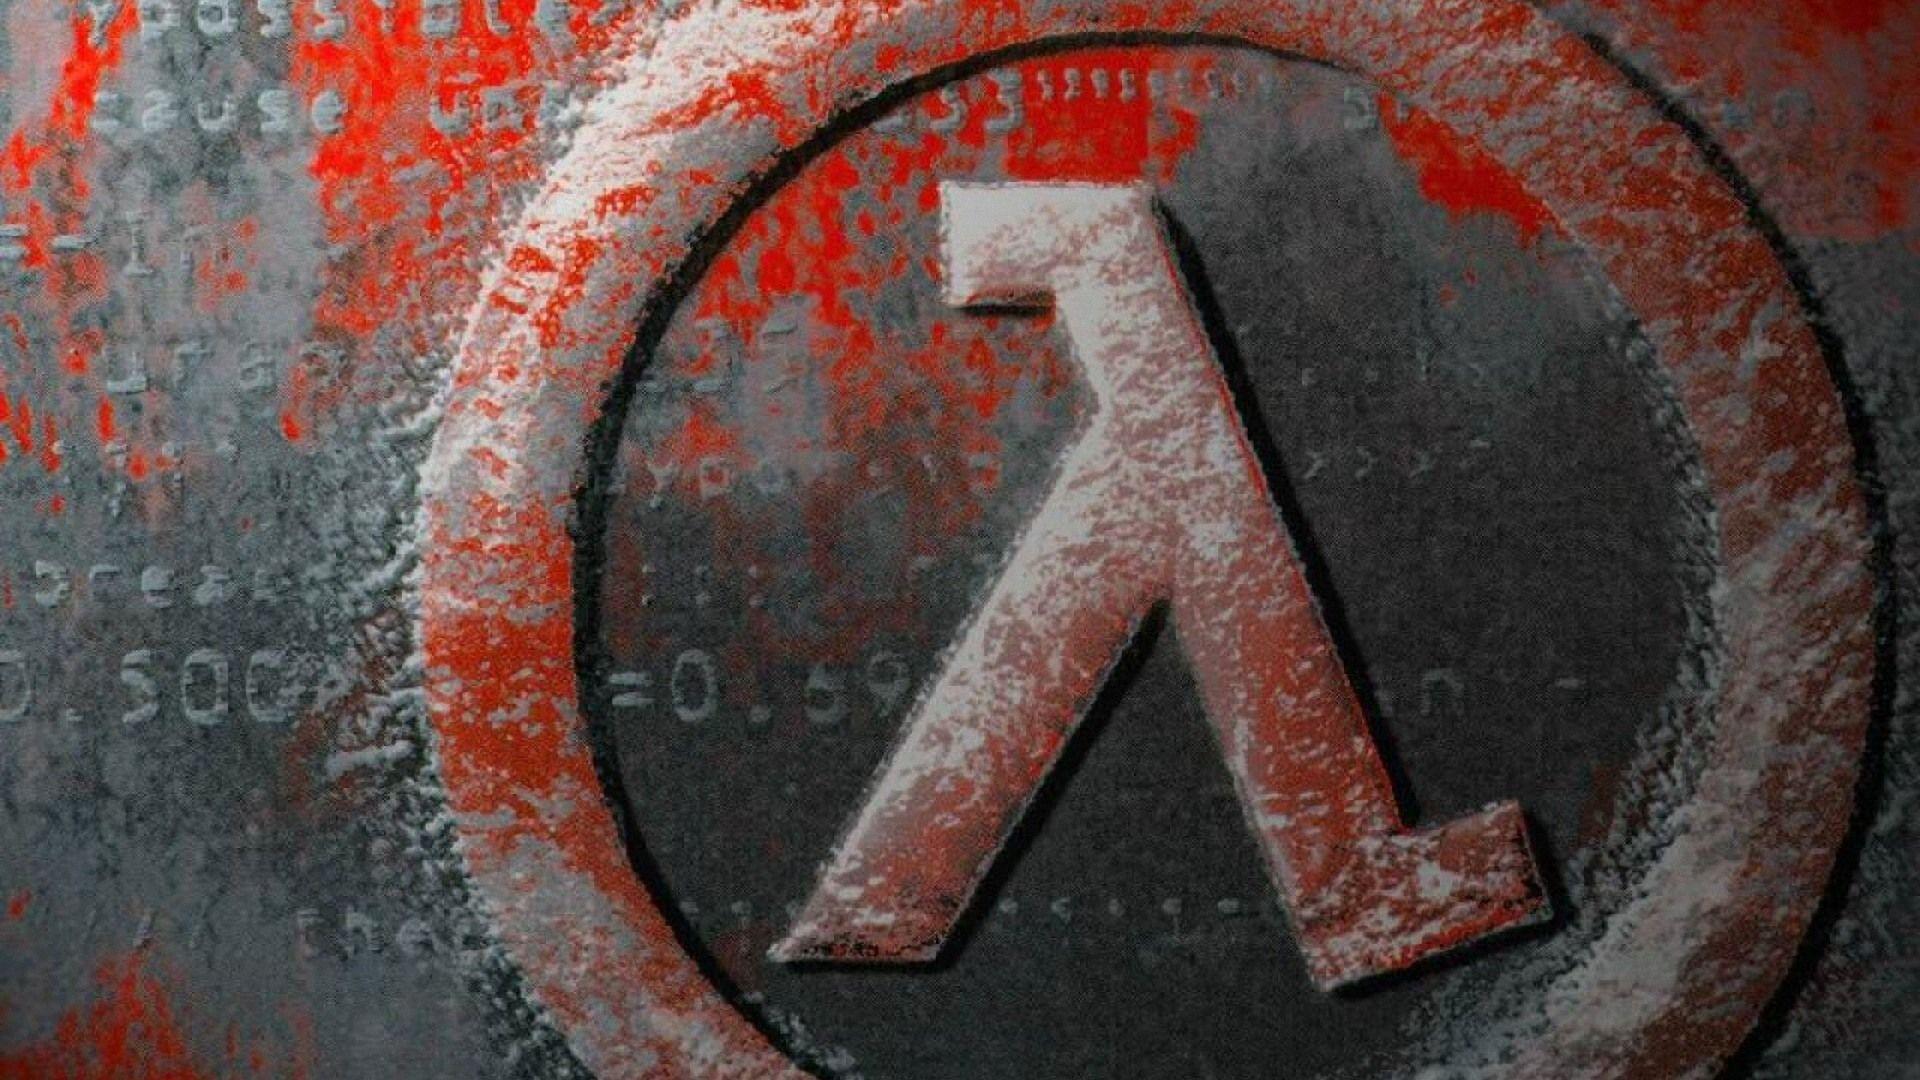 Wallpaper Of The Day: Half Lifex1080px Half Life Picture